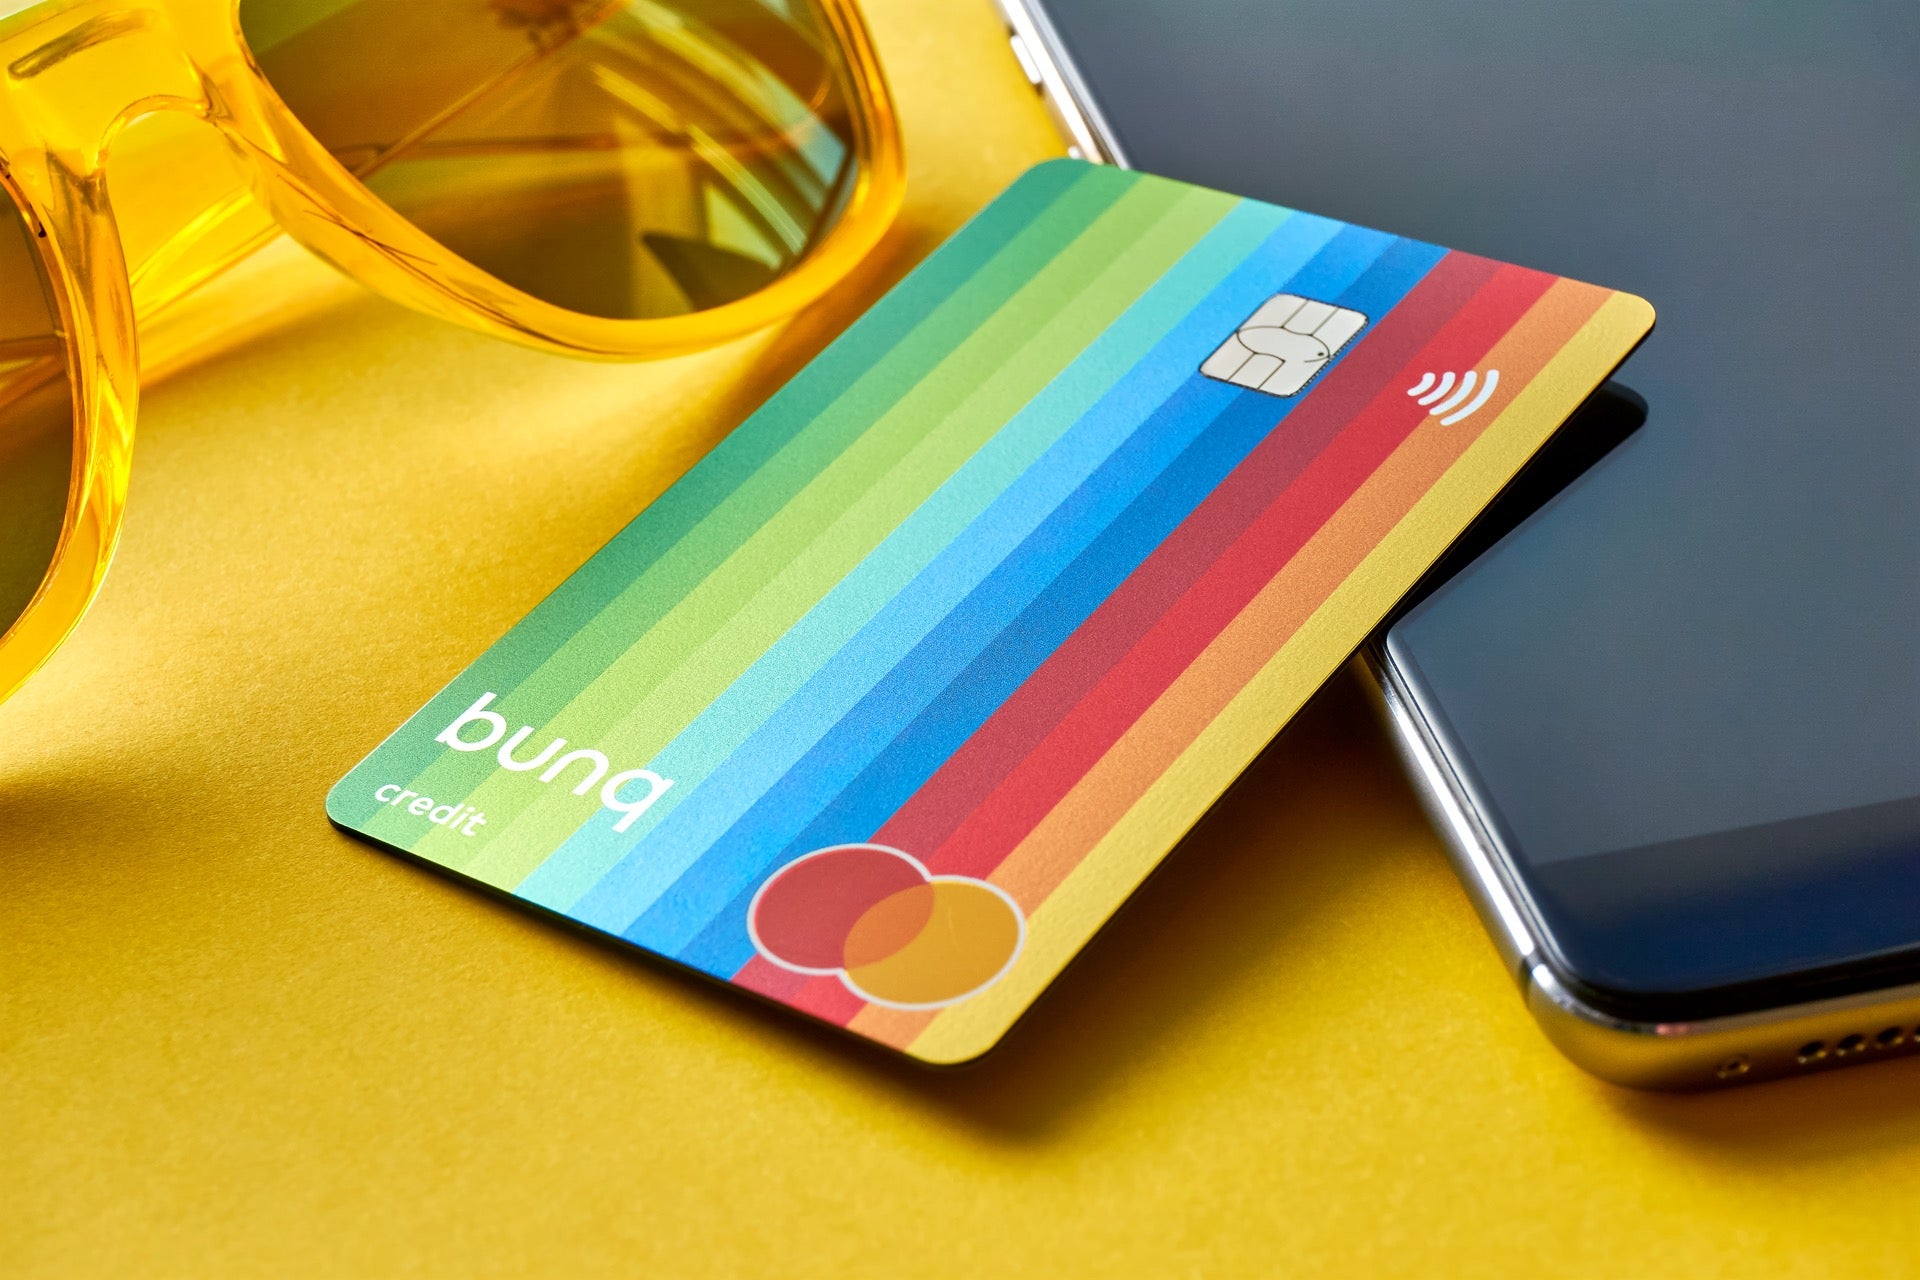 bunq secures $228m Series A, but has a long way to go to topple Revolut